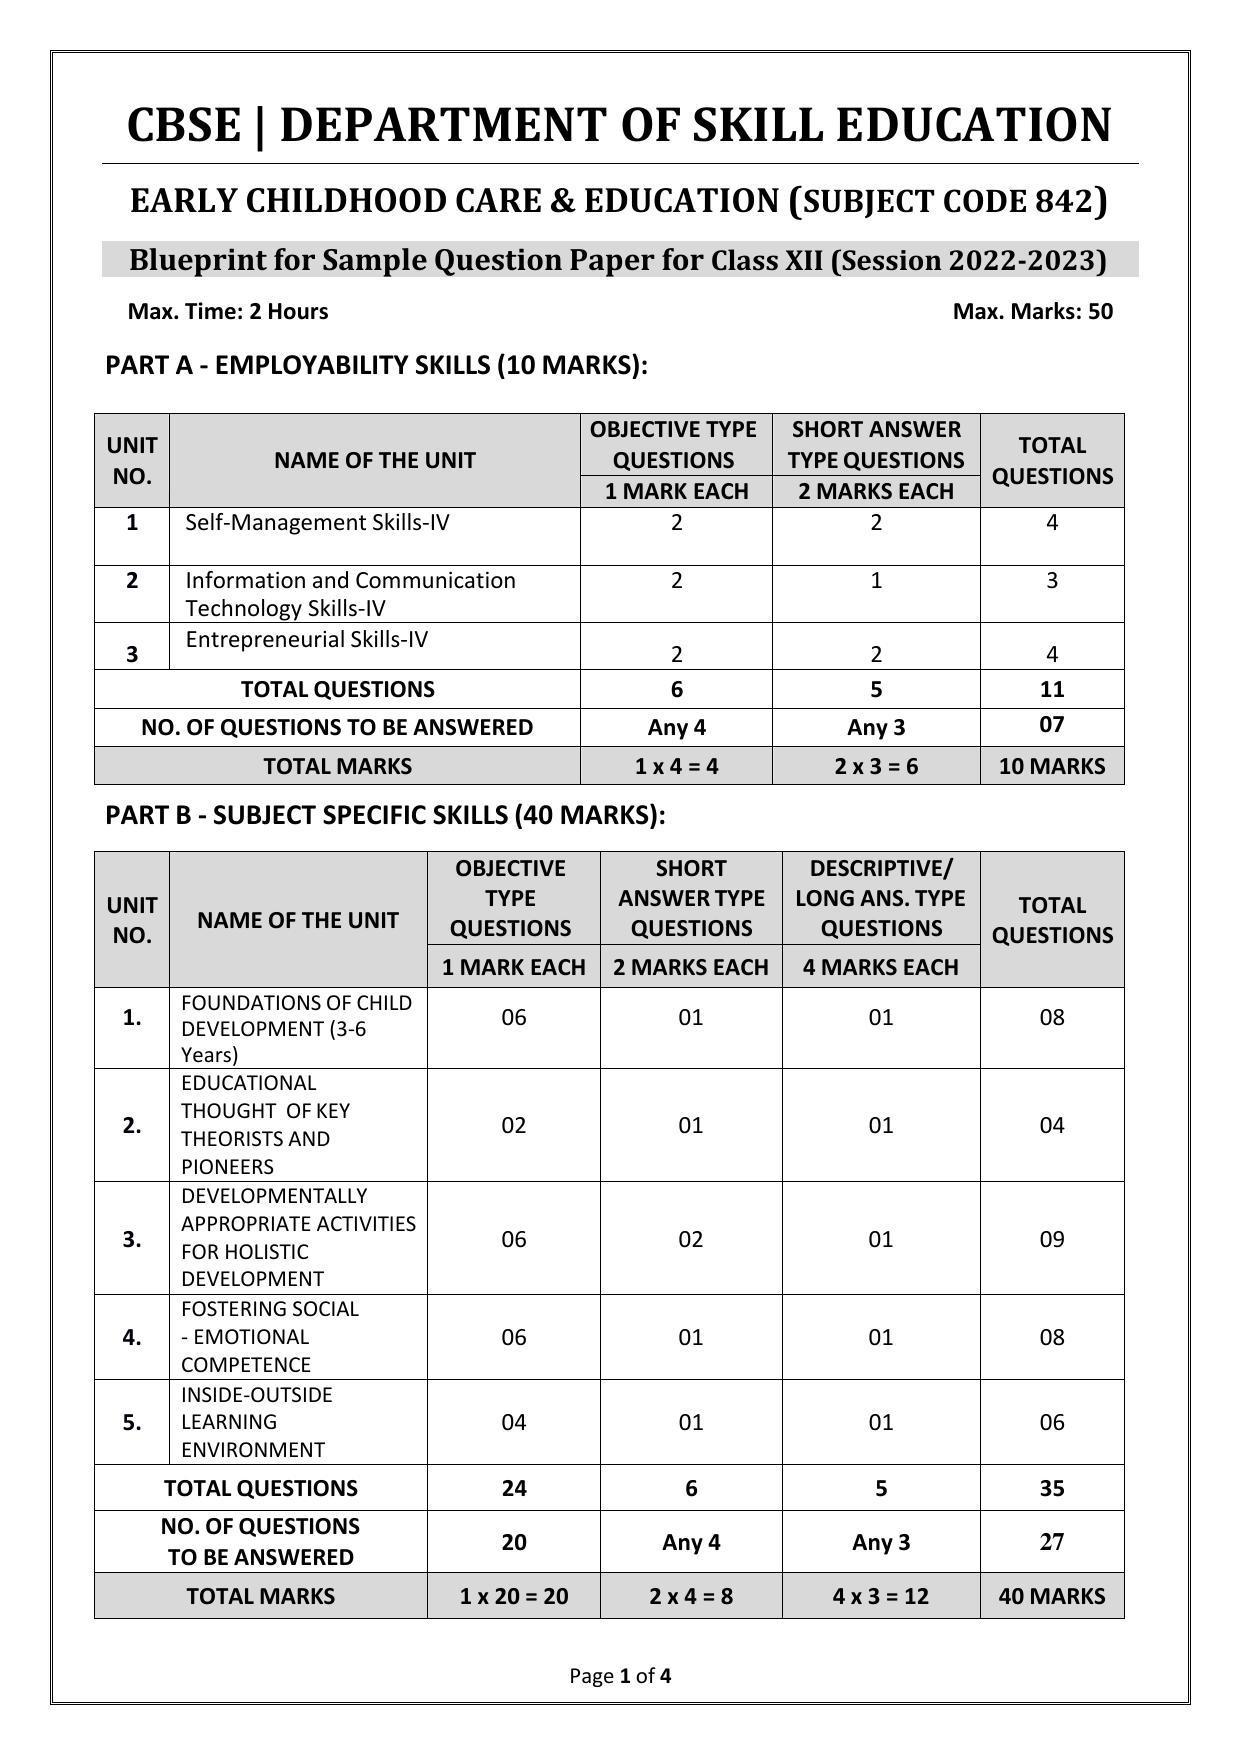 CBSE Class 10 Early Childhood Care & Education (Skill Education) Sample Papers 2023 - Page 1